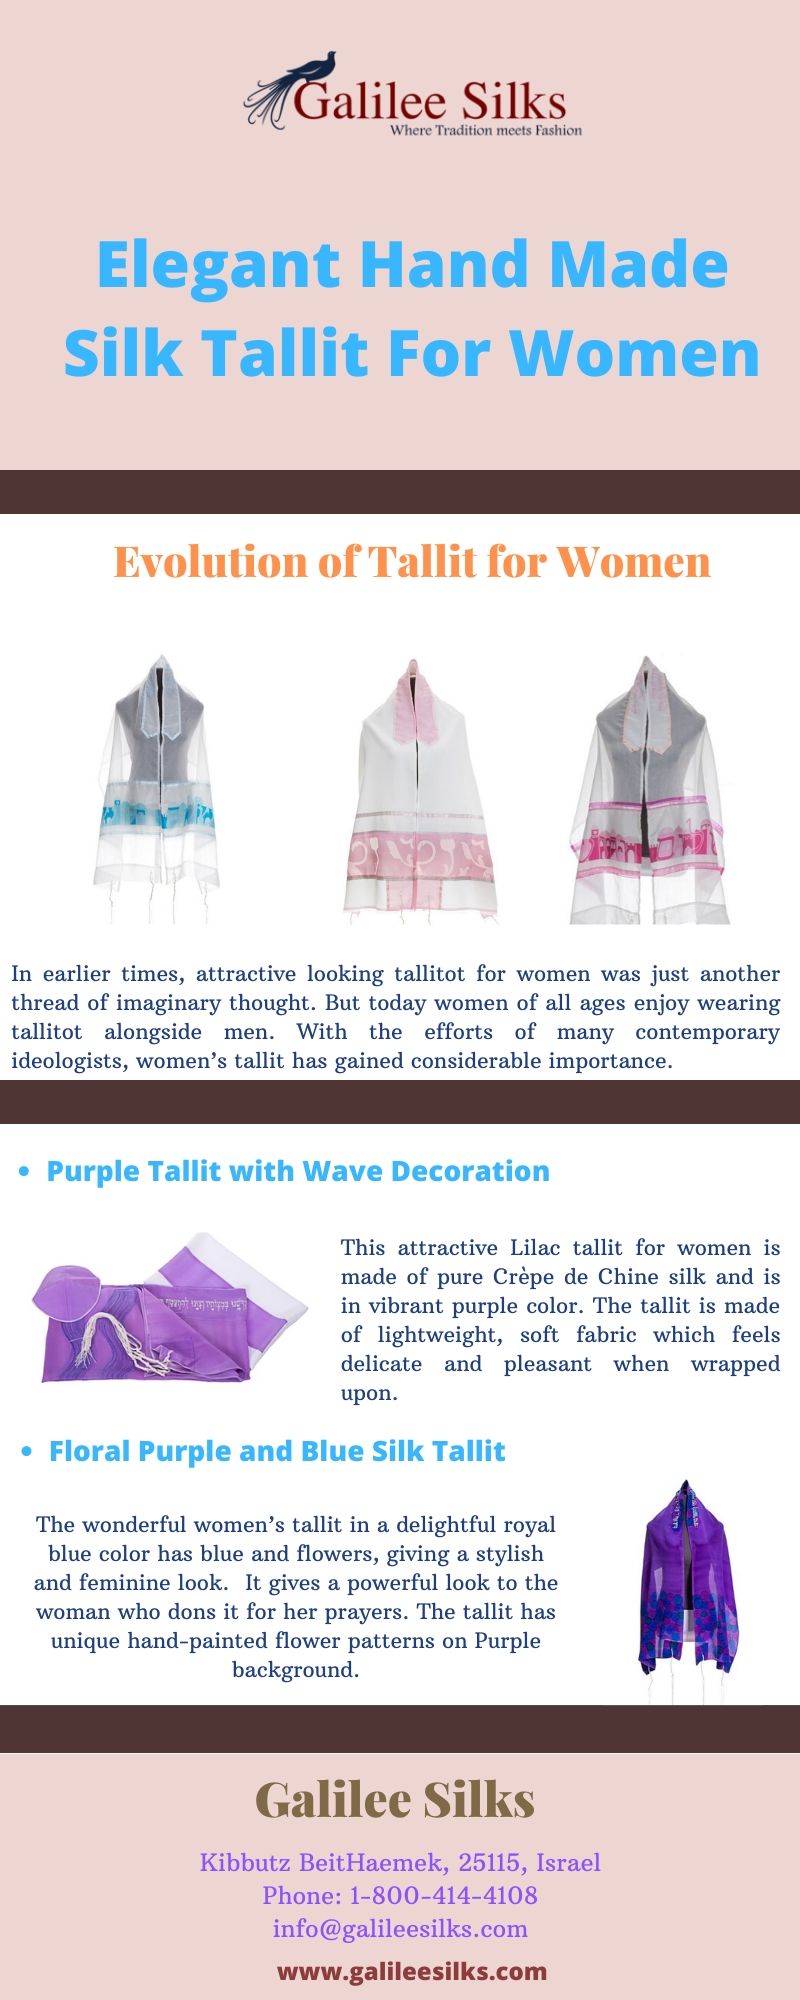 Elegant Hand Made Silk Tallit for Women At Galilee Silks, we strive to bring exclusive tallitot collections that are a piece of perfection in the world of Judaica art. For more details, please visit this link: https://bit.ly/2P1RS2S by amramrafi